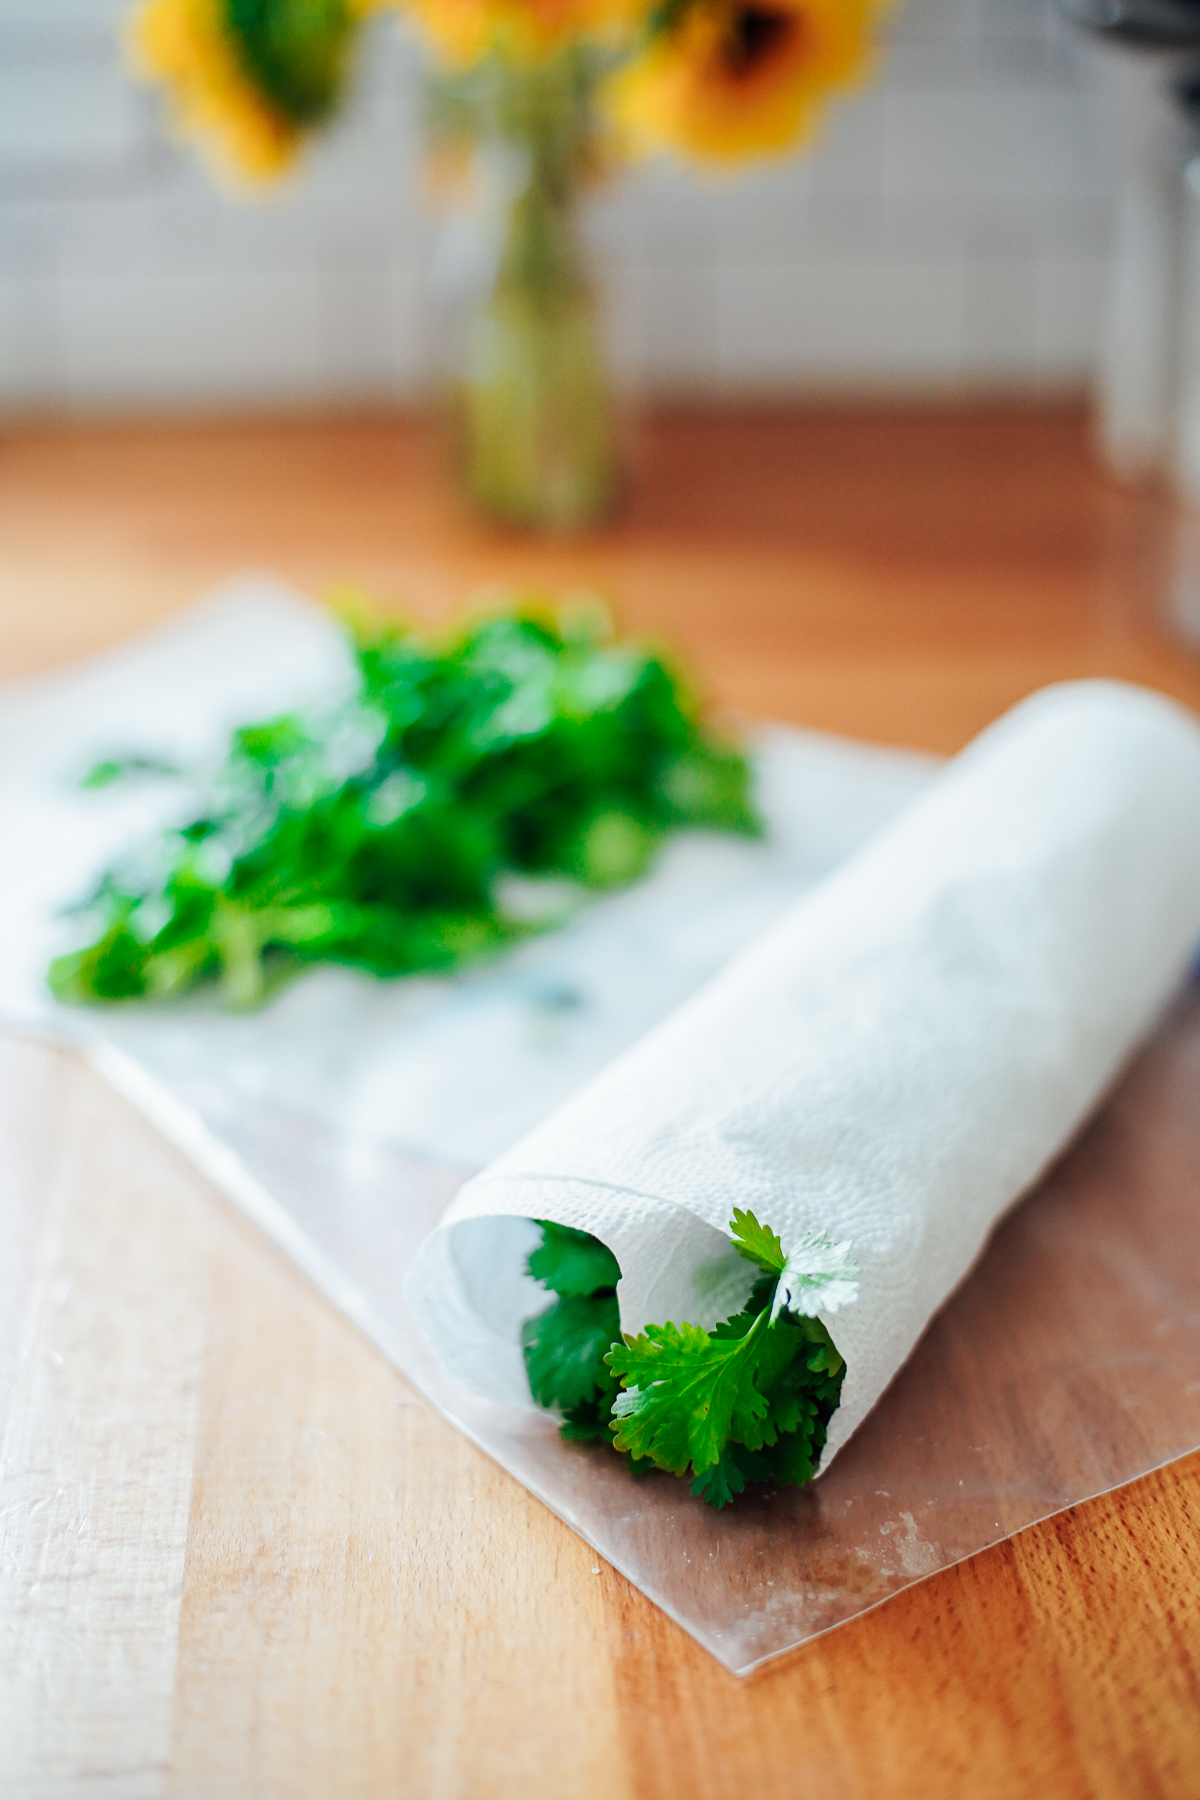 Cilantro rolled up a paper towel and placed in a ziploc bag.